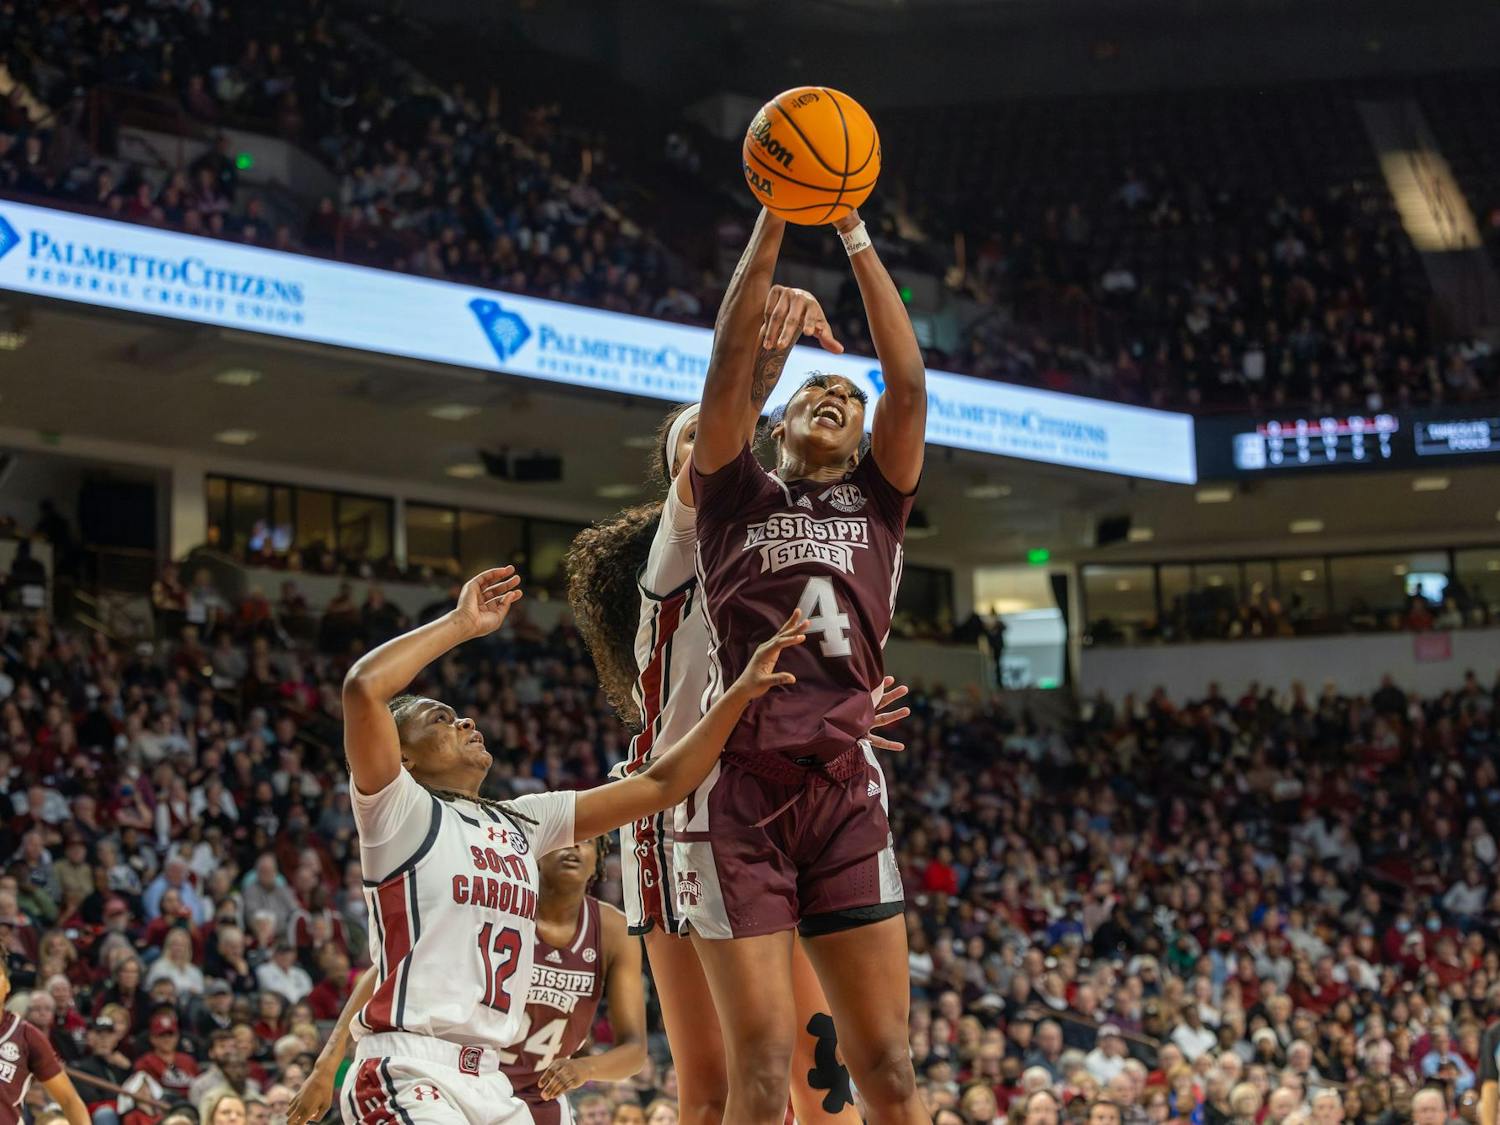 Mississippi's graduate center Jessika Carter attempts to score for the Bulldogs as South Carolina players block the shot. The South Carolina Gamecocks defeated the Mississippi State Bulldogs 85-66 Sunday in its SEC home opener.